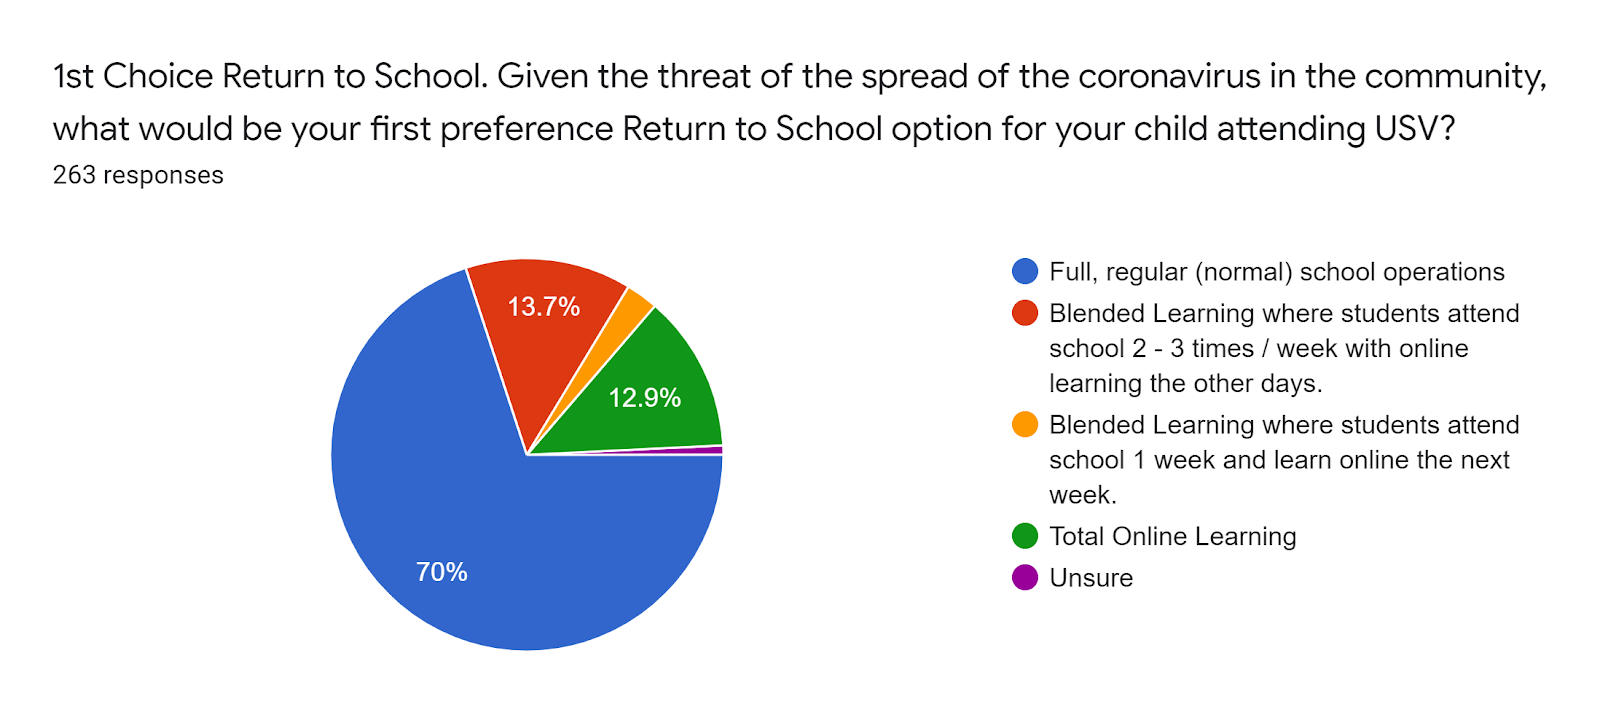 Forms response chart. Question title: 1st Choice Return to School. Given the threat of the spread of the coronavirus in the community, what would be your first preference Return to School option for your child attending USV?. Number of responses: 263 responses.